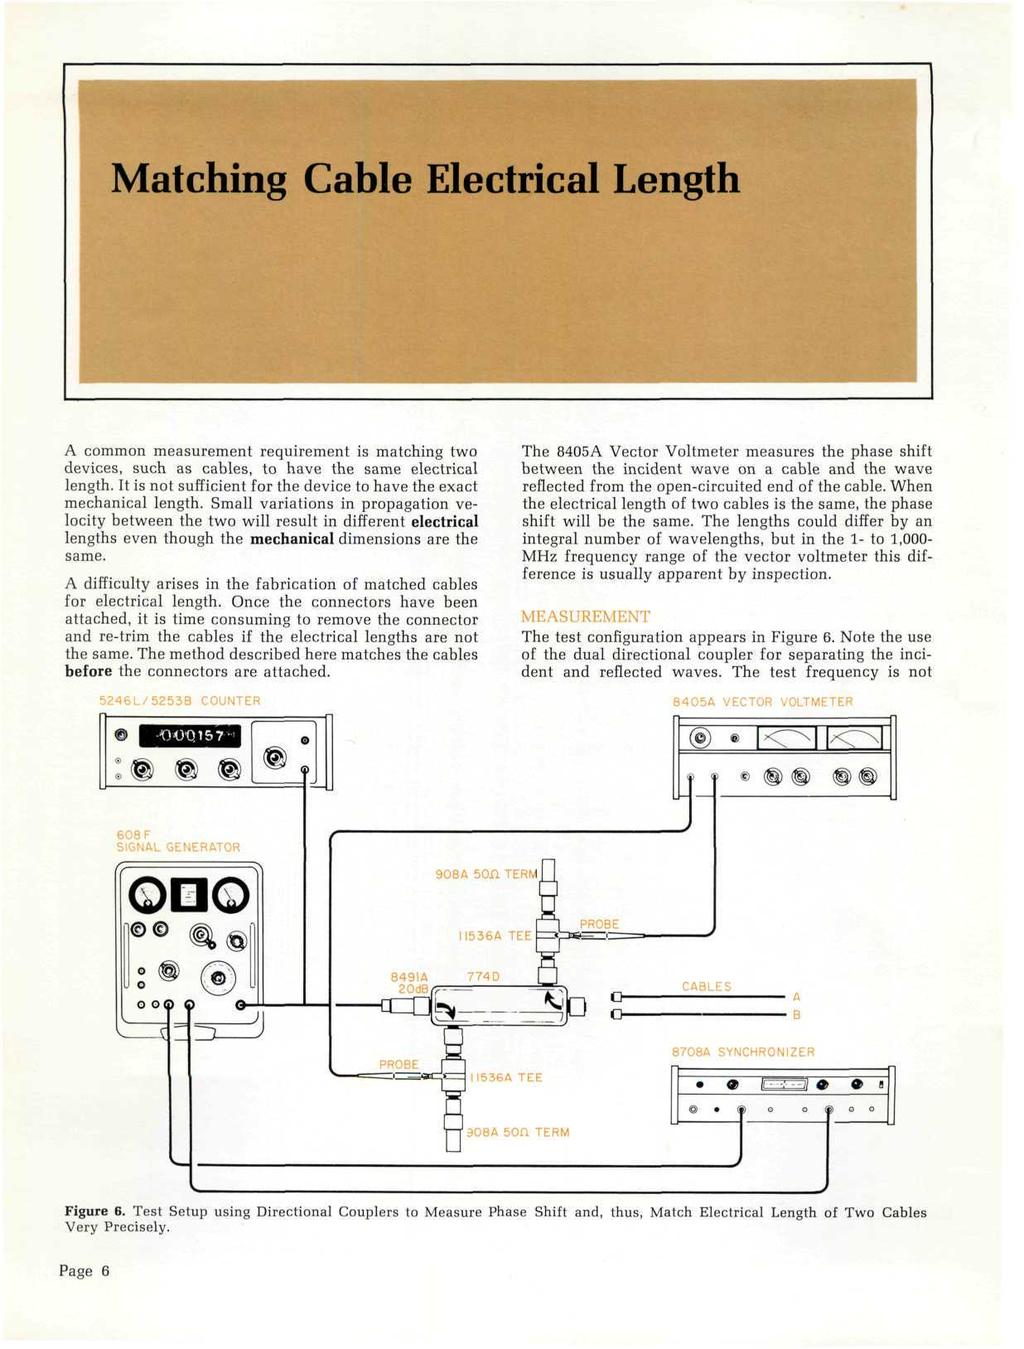 Matching Cable Electrical Length A common measurement requirement is matching two devices, such as cables, to have the same electrical length.